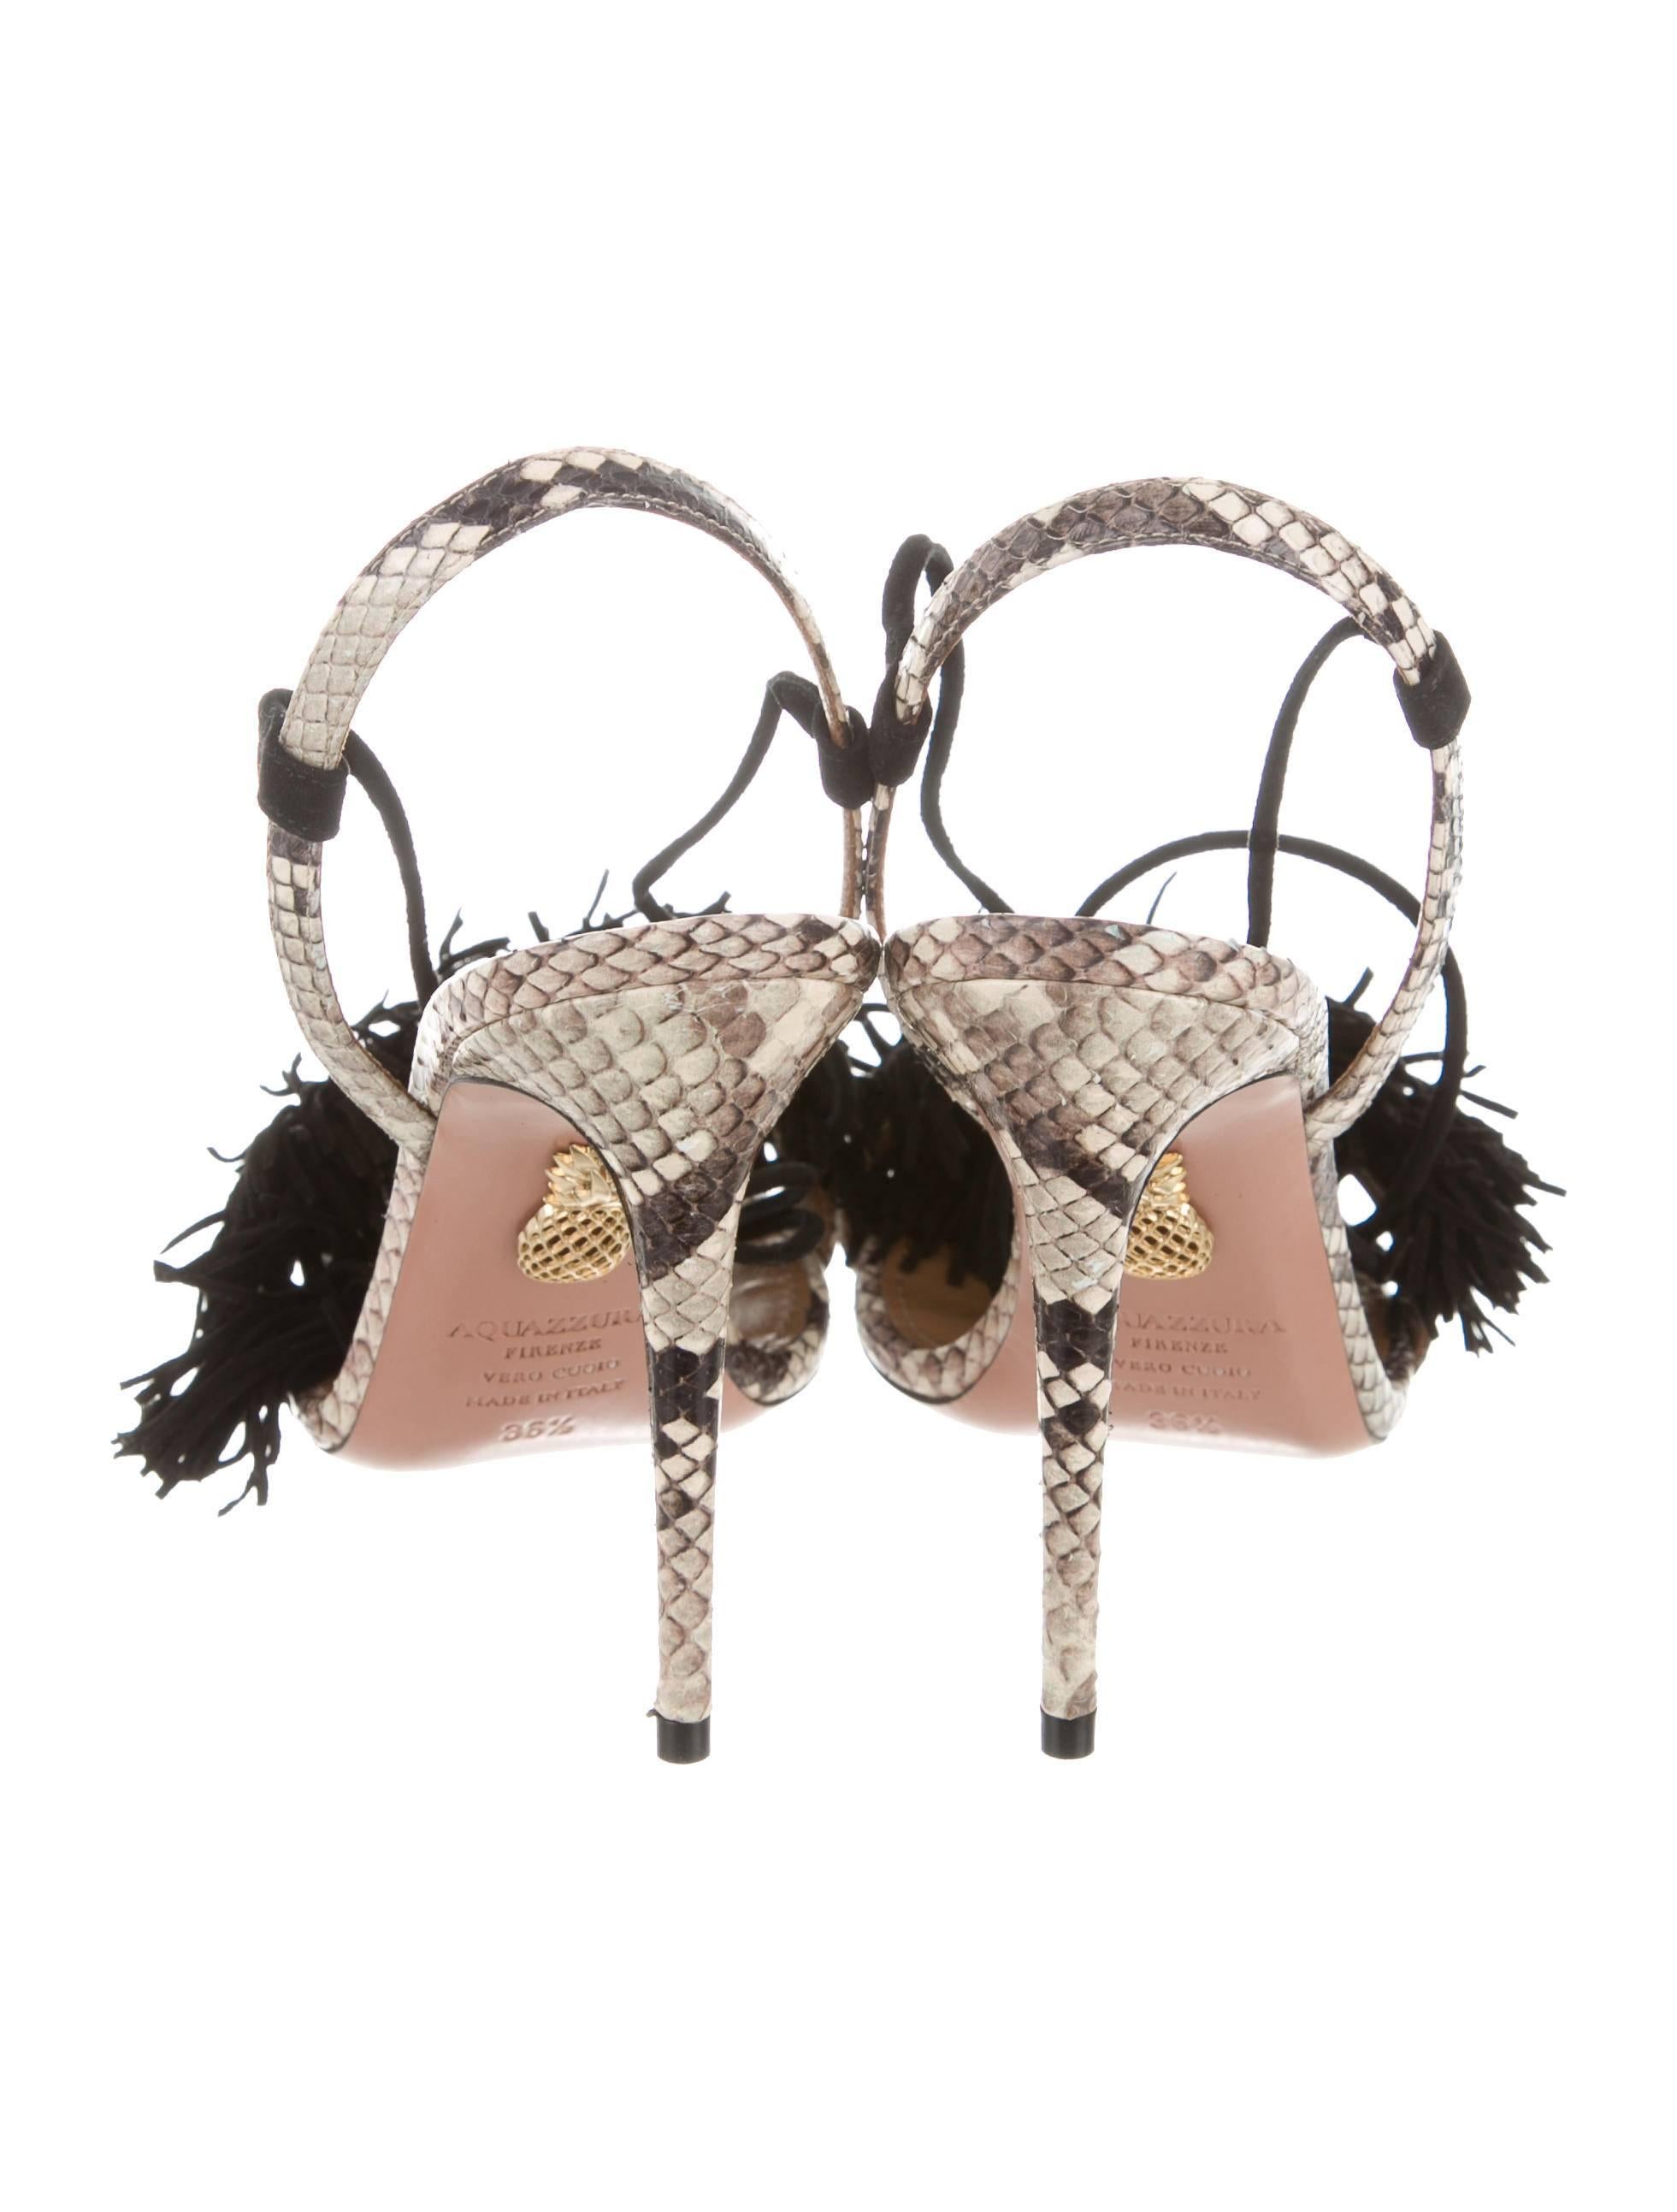 Aquazzura NEW & SOLD OUT Black Leather Suede Pom Pom Sandals Heels 1